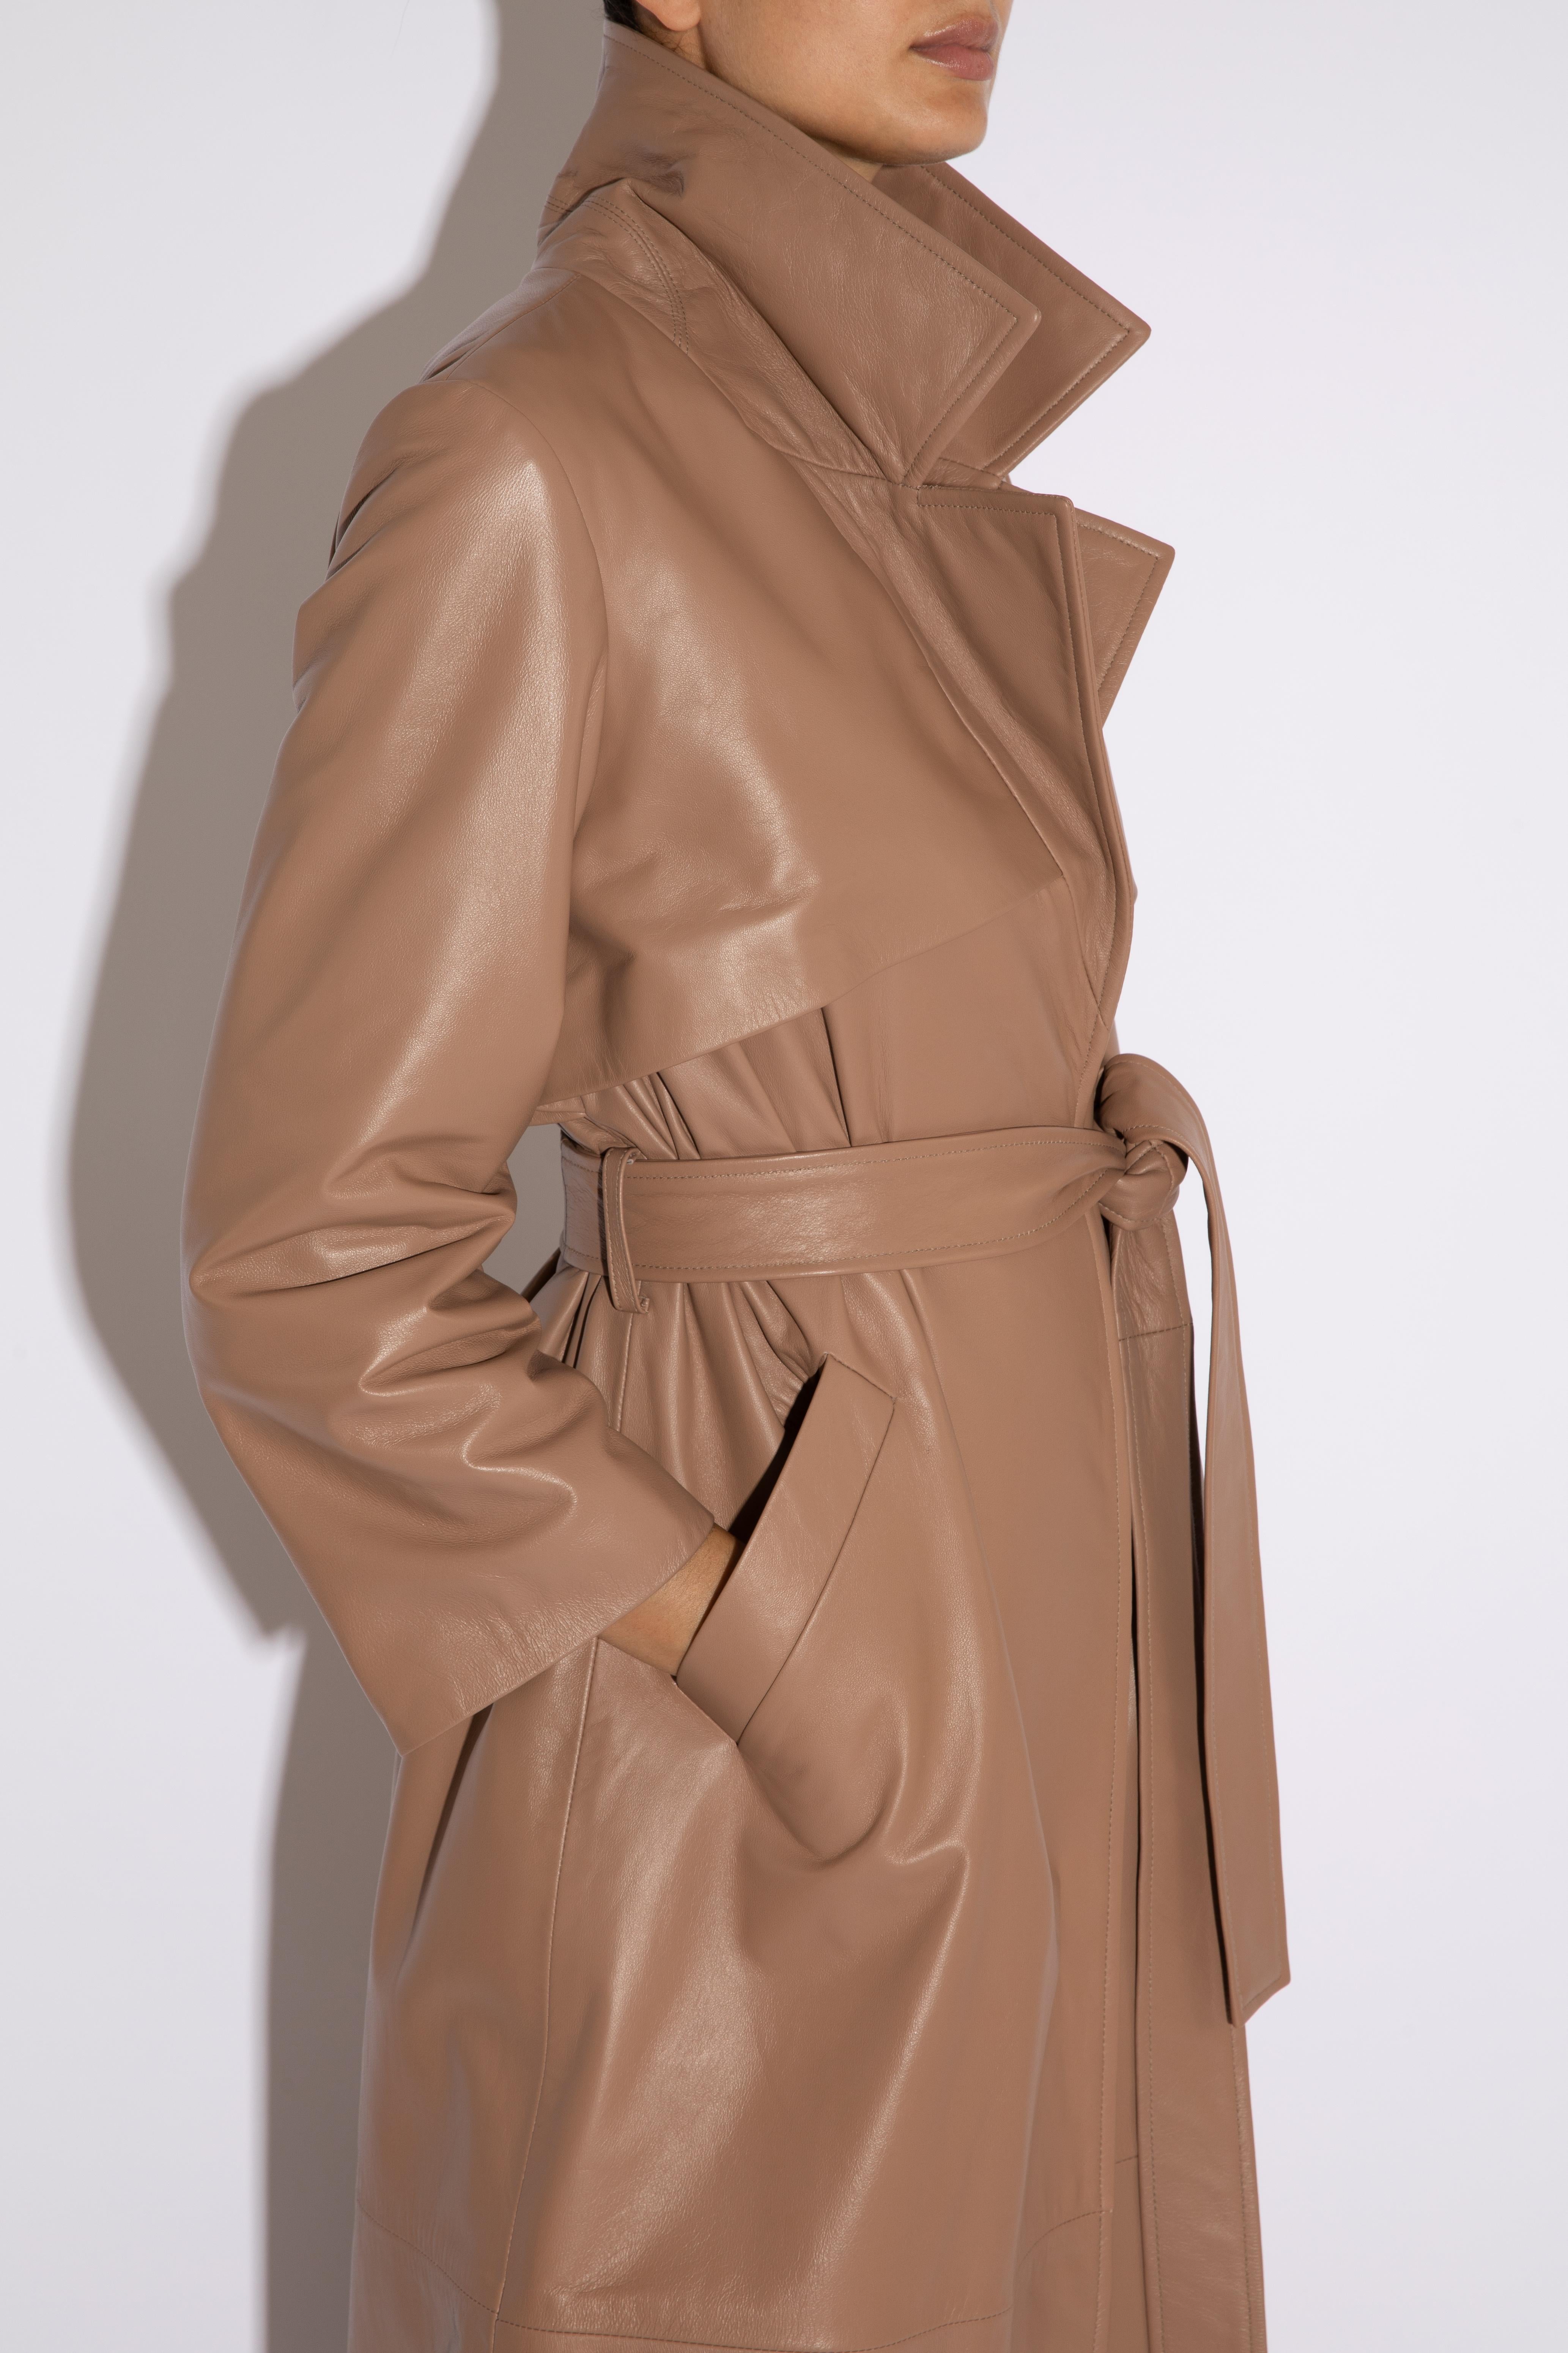 Women's Verheyen London Leather Trench Coat in Taupe Brown - Size uk 10 For Sale